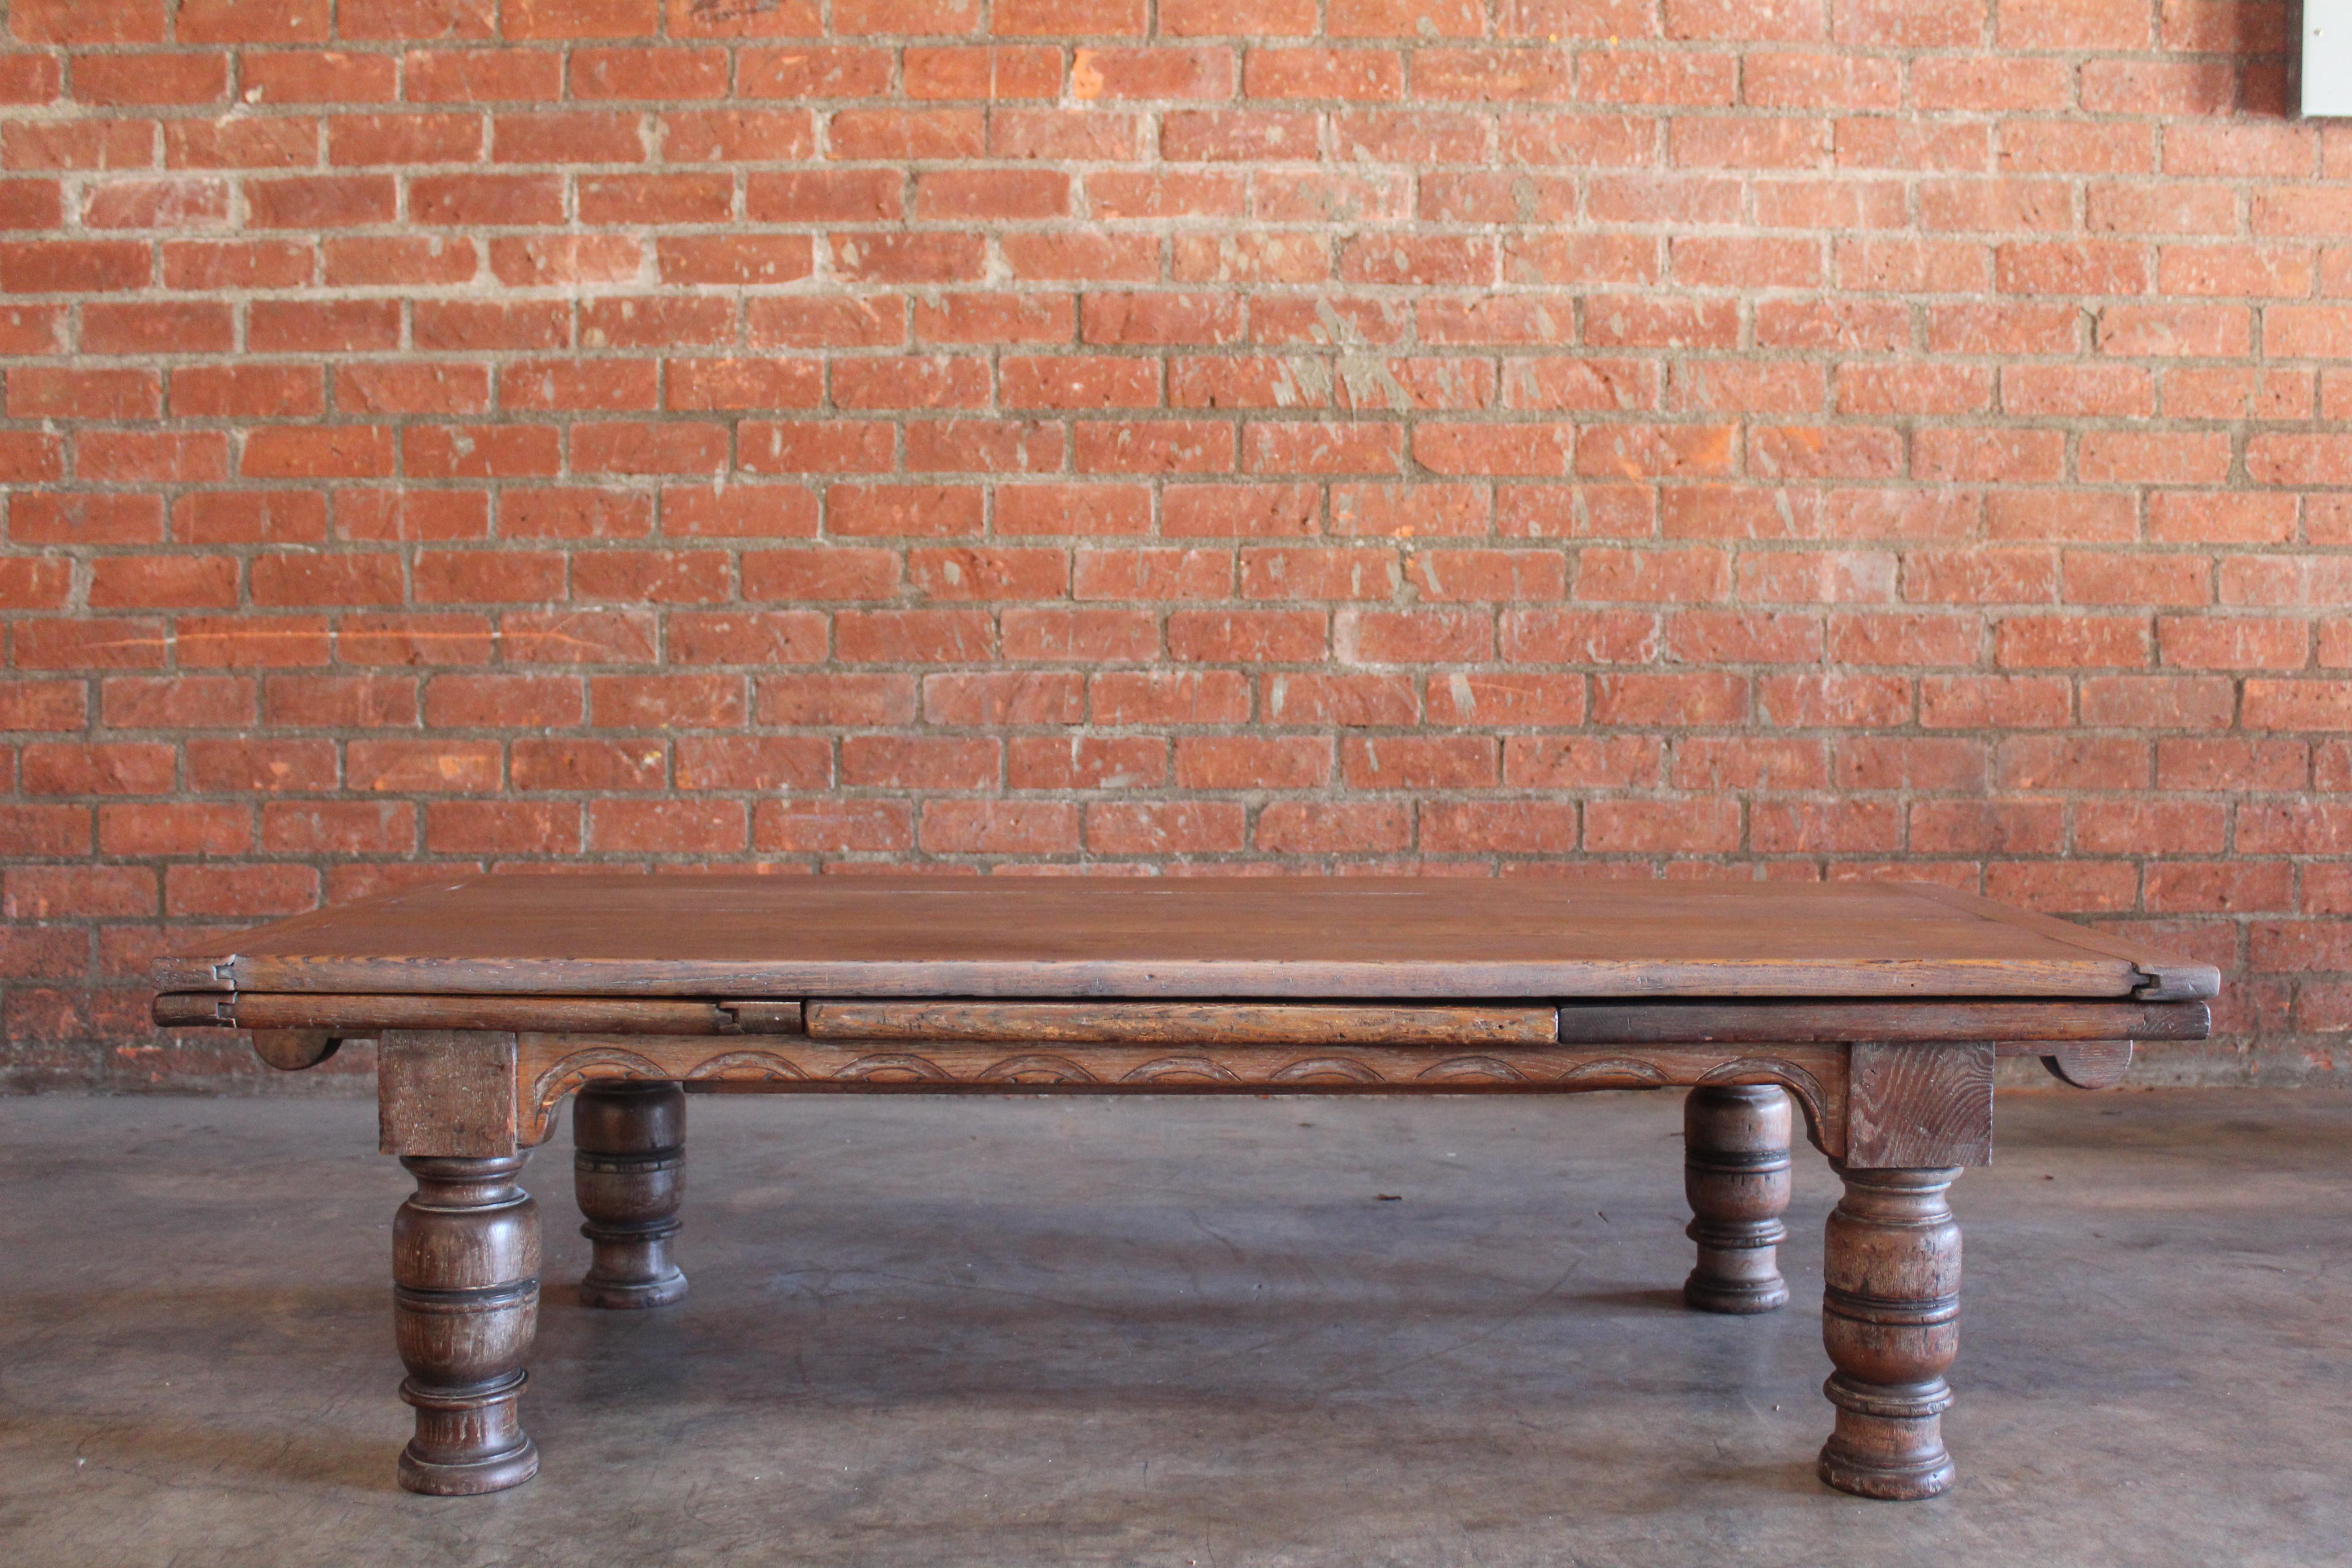 Antique solid oak expandable coffee table, France, late 18th century.
68 wide, 112.5 wide when expanded. In overall excellent condition.